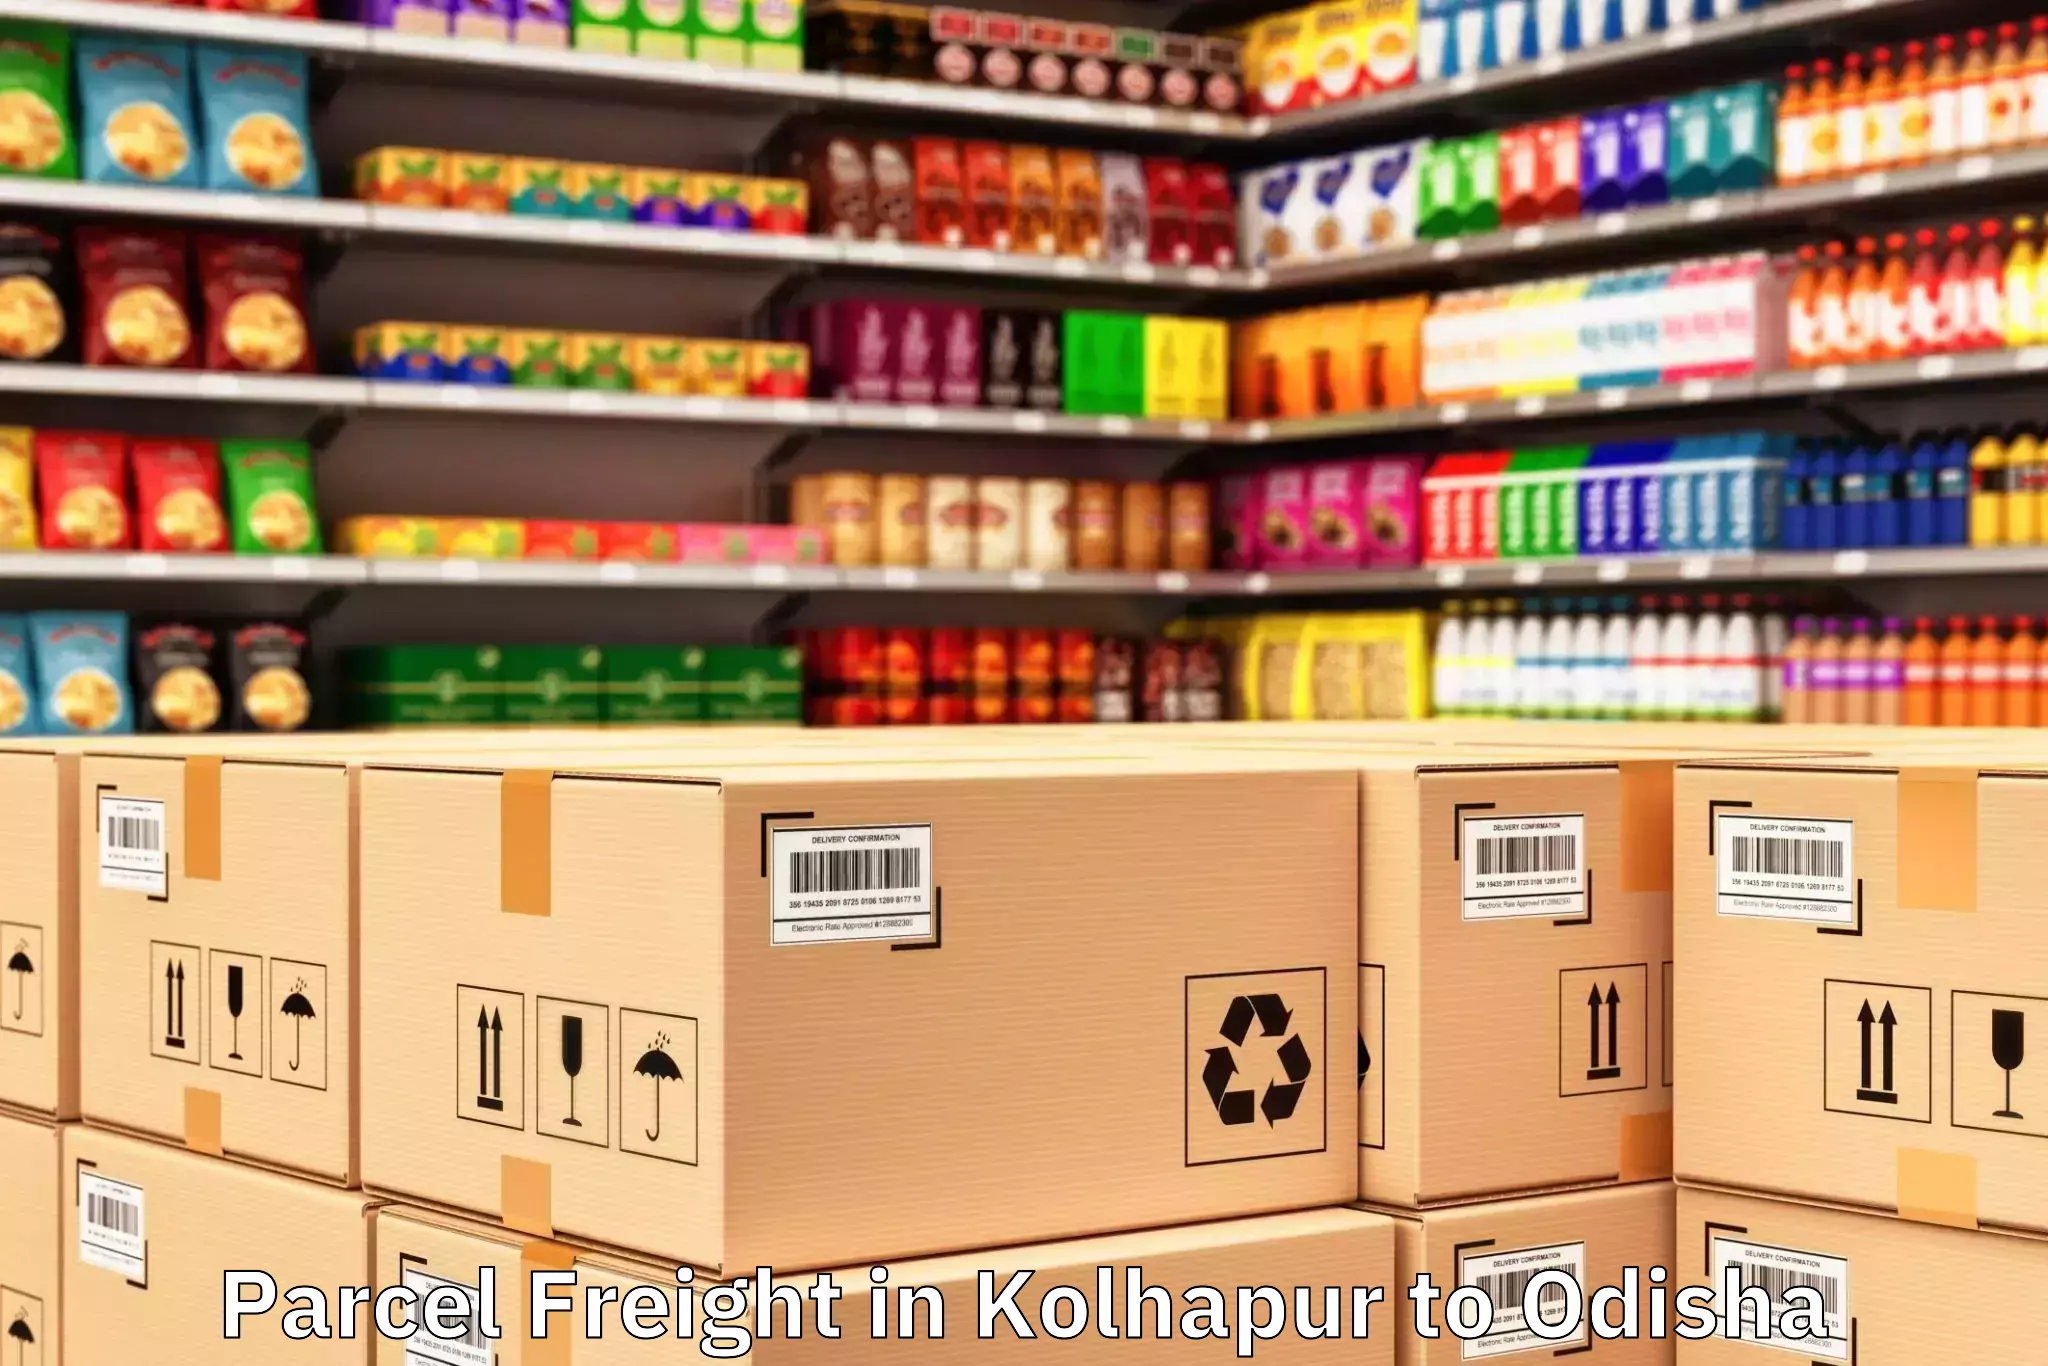 Top Kolhapur to Jamda Parcel Freight Available